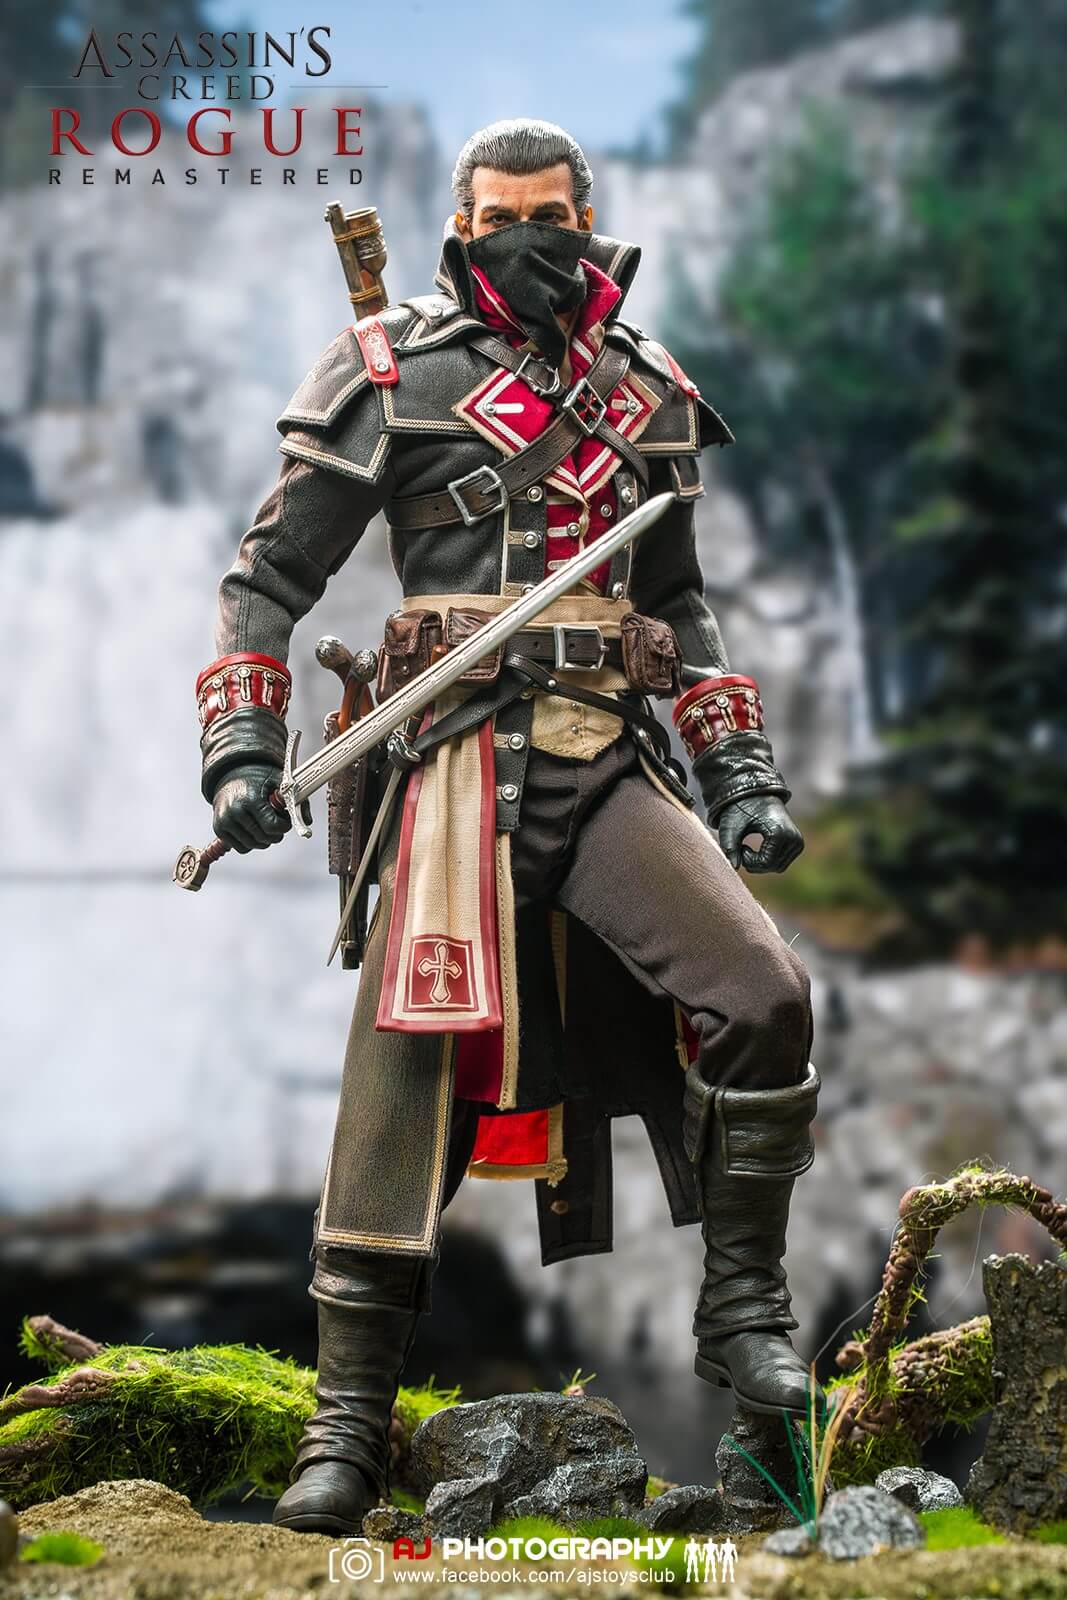 Damtoys Assassins Creed Rogue Th Scale Shay Patrick Cormac Figround